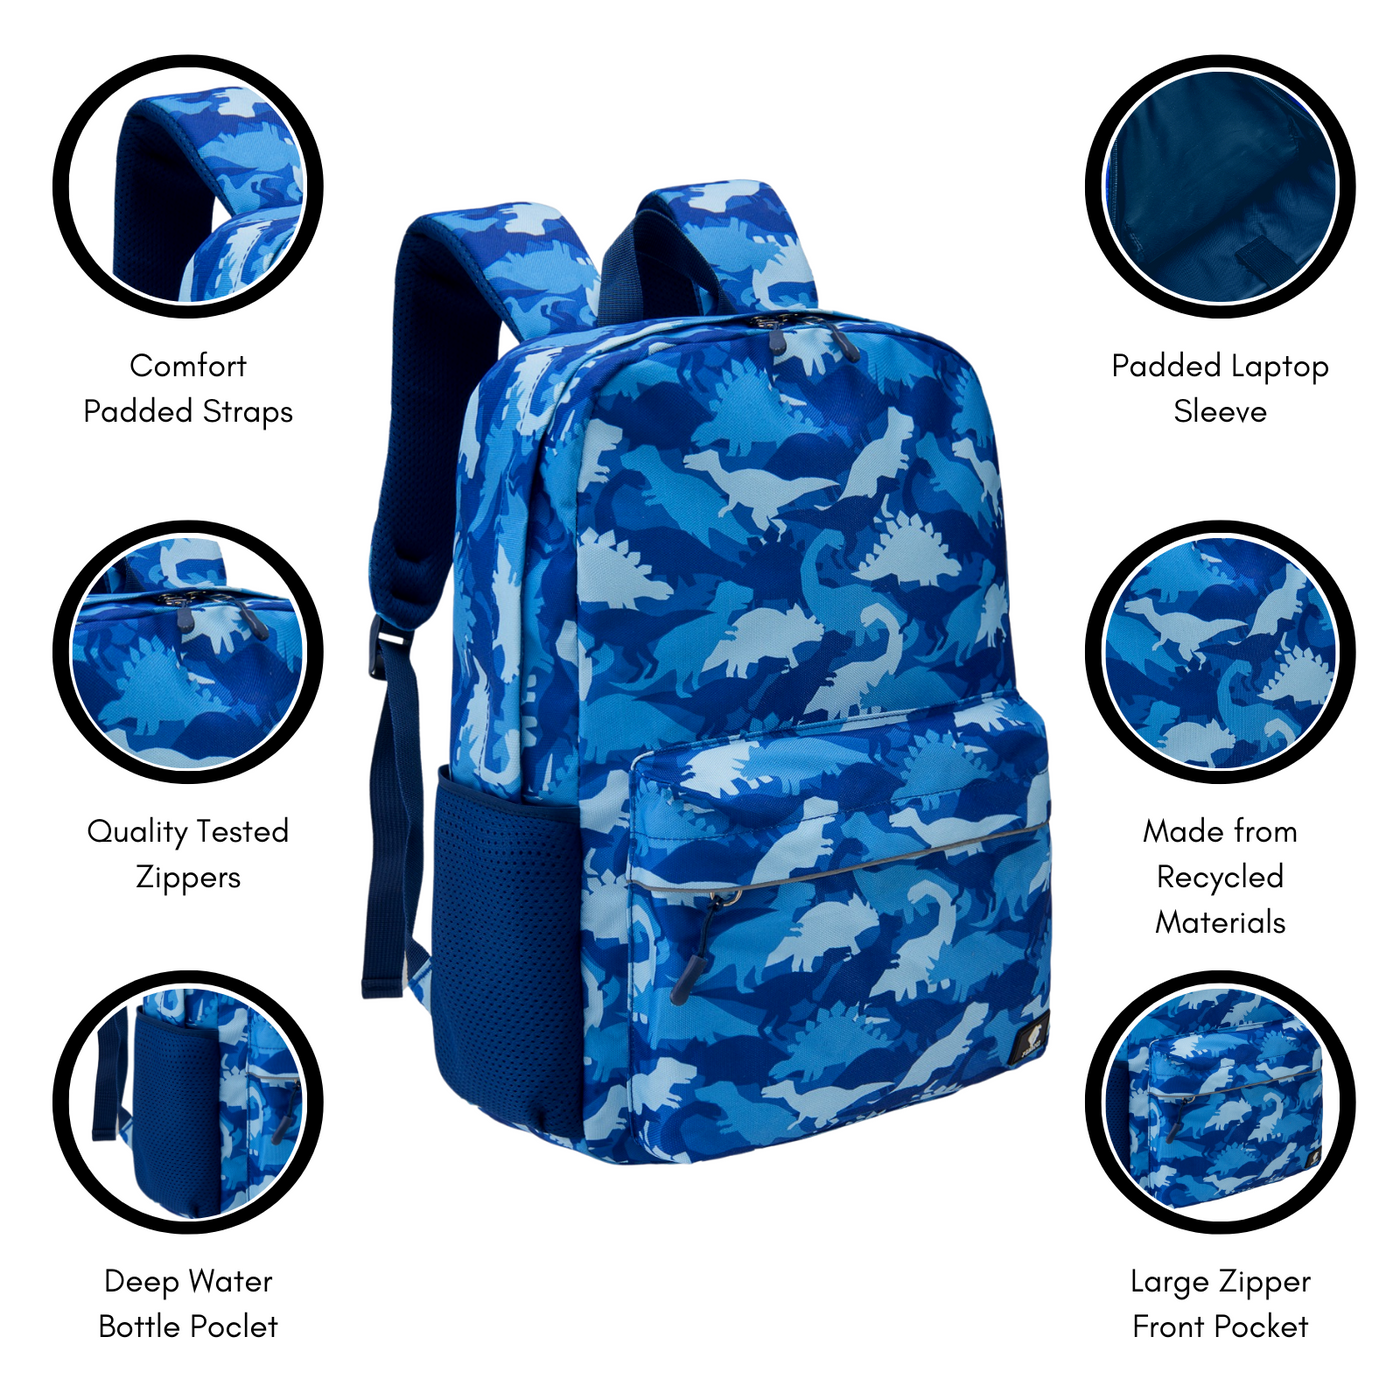 Kids Backpack and Lunch Box Set with Bento Box, Blue Tie Dye, Gives Back to  Great Cause, 17 Inches